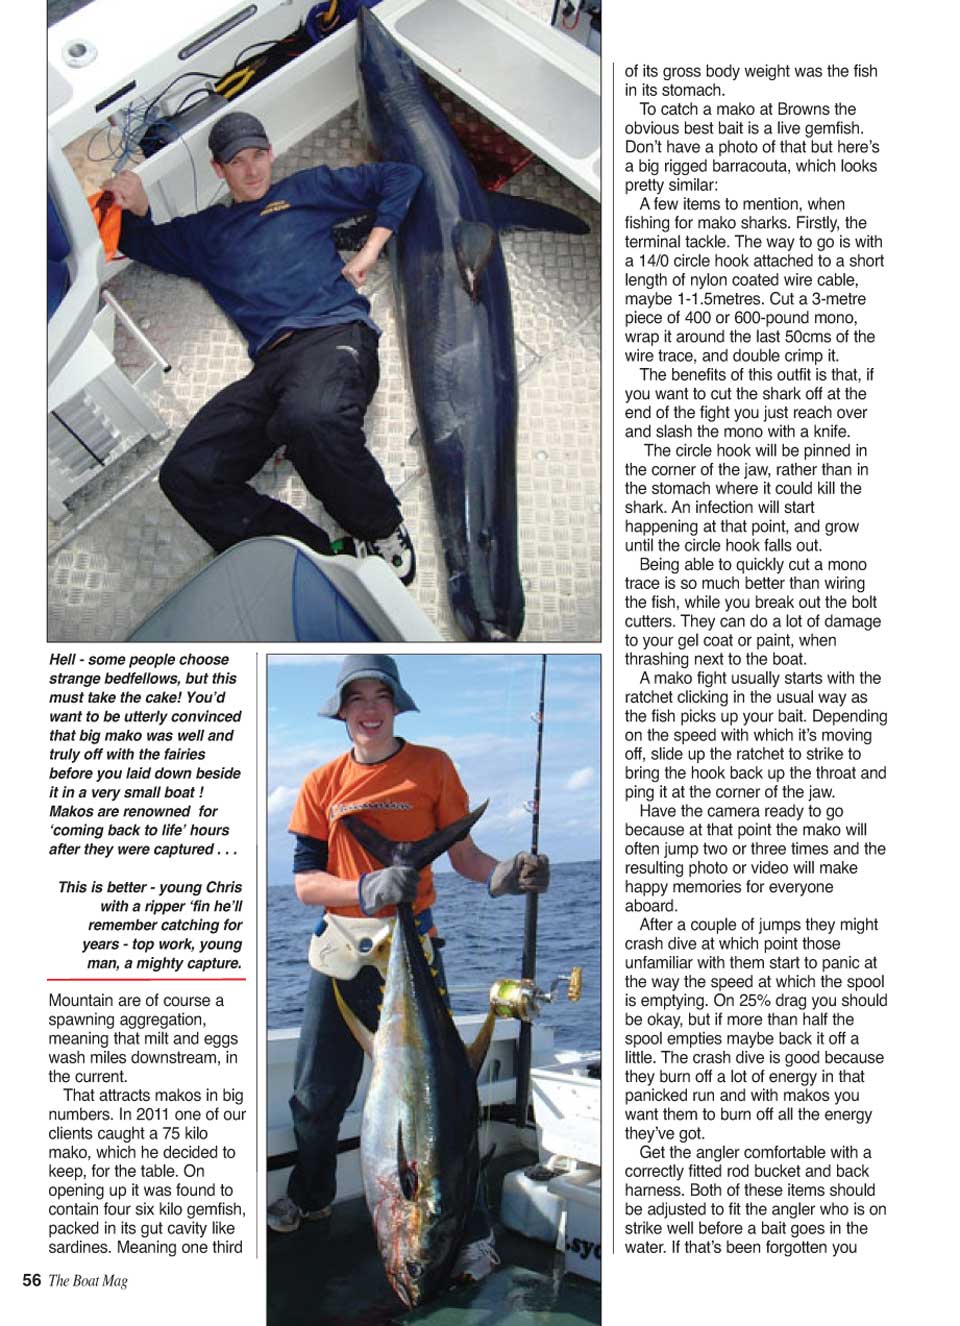 Chris with a Yellowfin Tuna and a huge Mako shark caught offshore